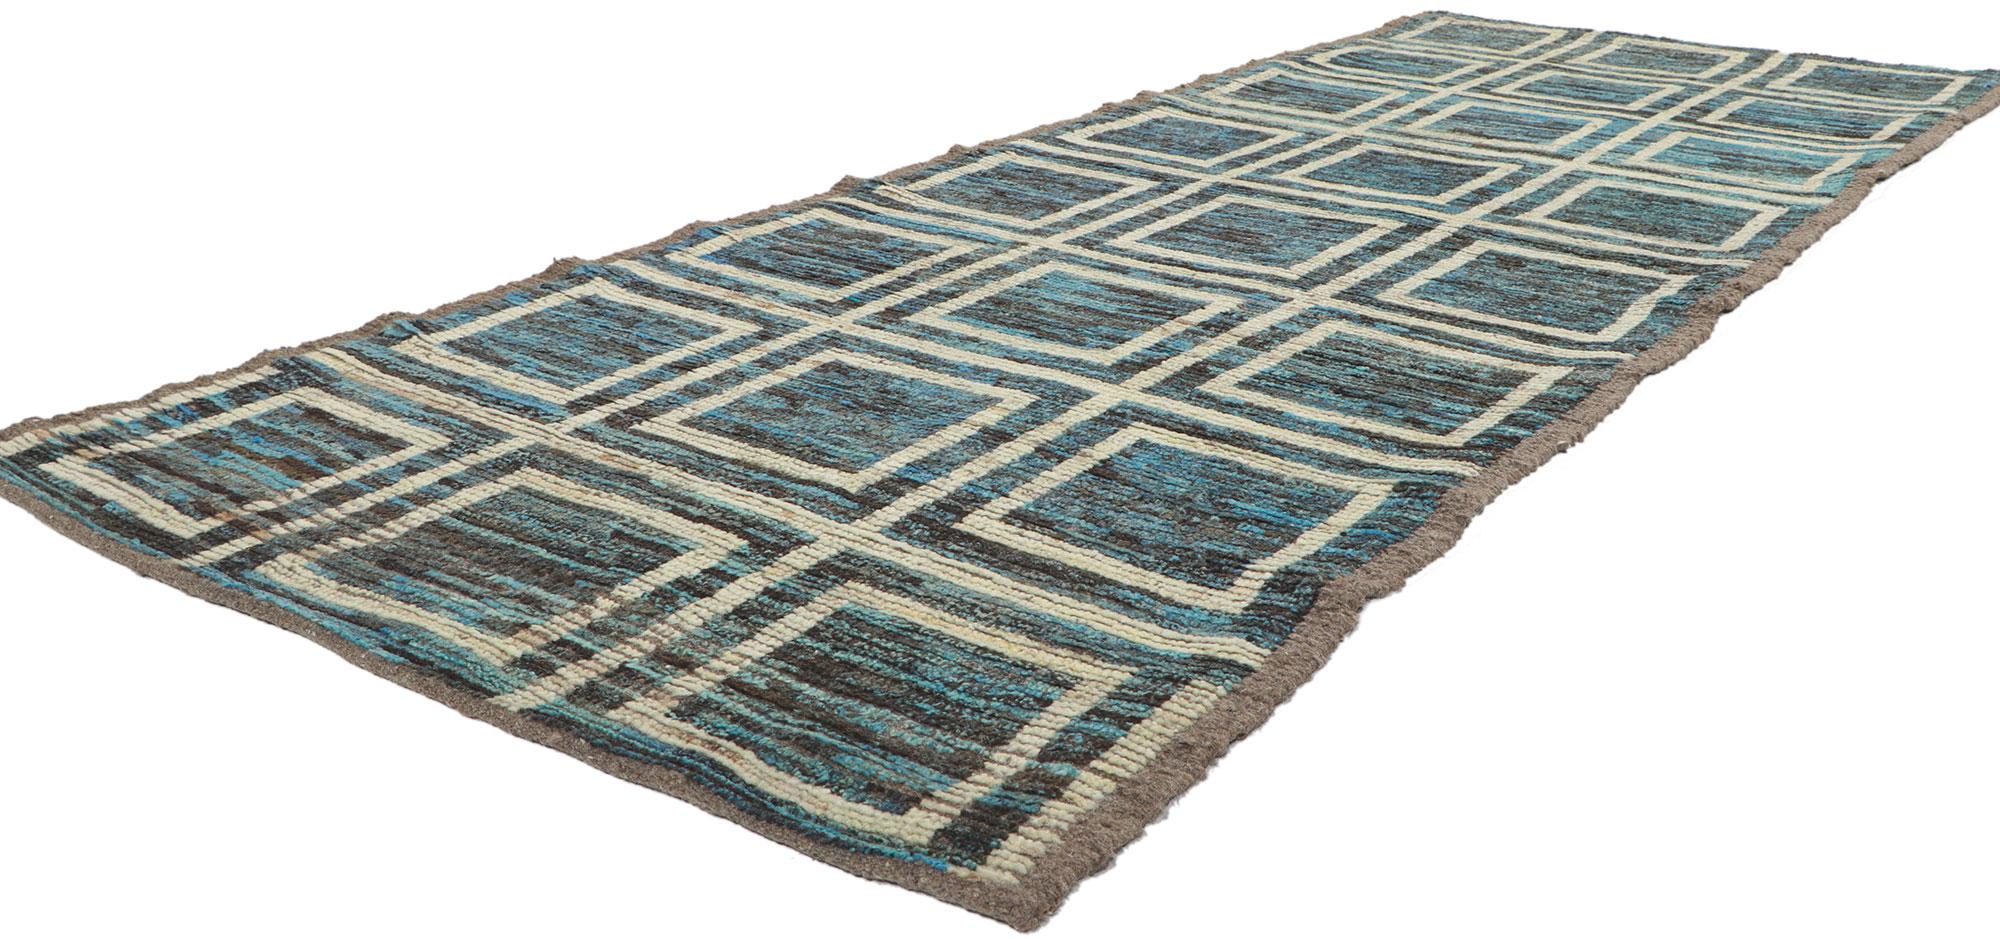 80767 New Contemporary Moroccan runner, 03'04 x 09'06. With its nomadic charm, incredible detail and texture, this hand knotted wool contemporary Moroccan runner is a captivating vision of woven beauty. The tribal pattern and earthy colorway woven